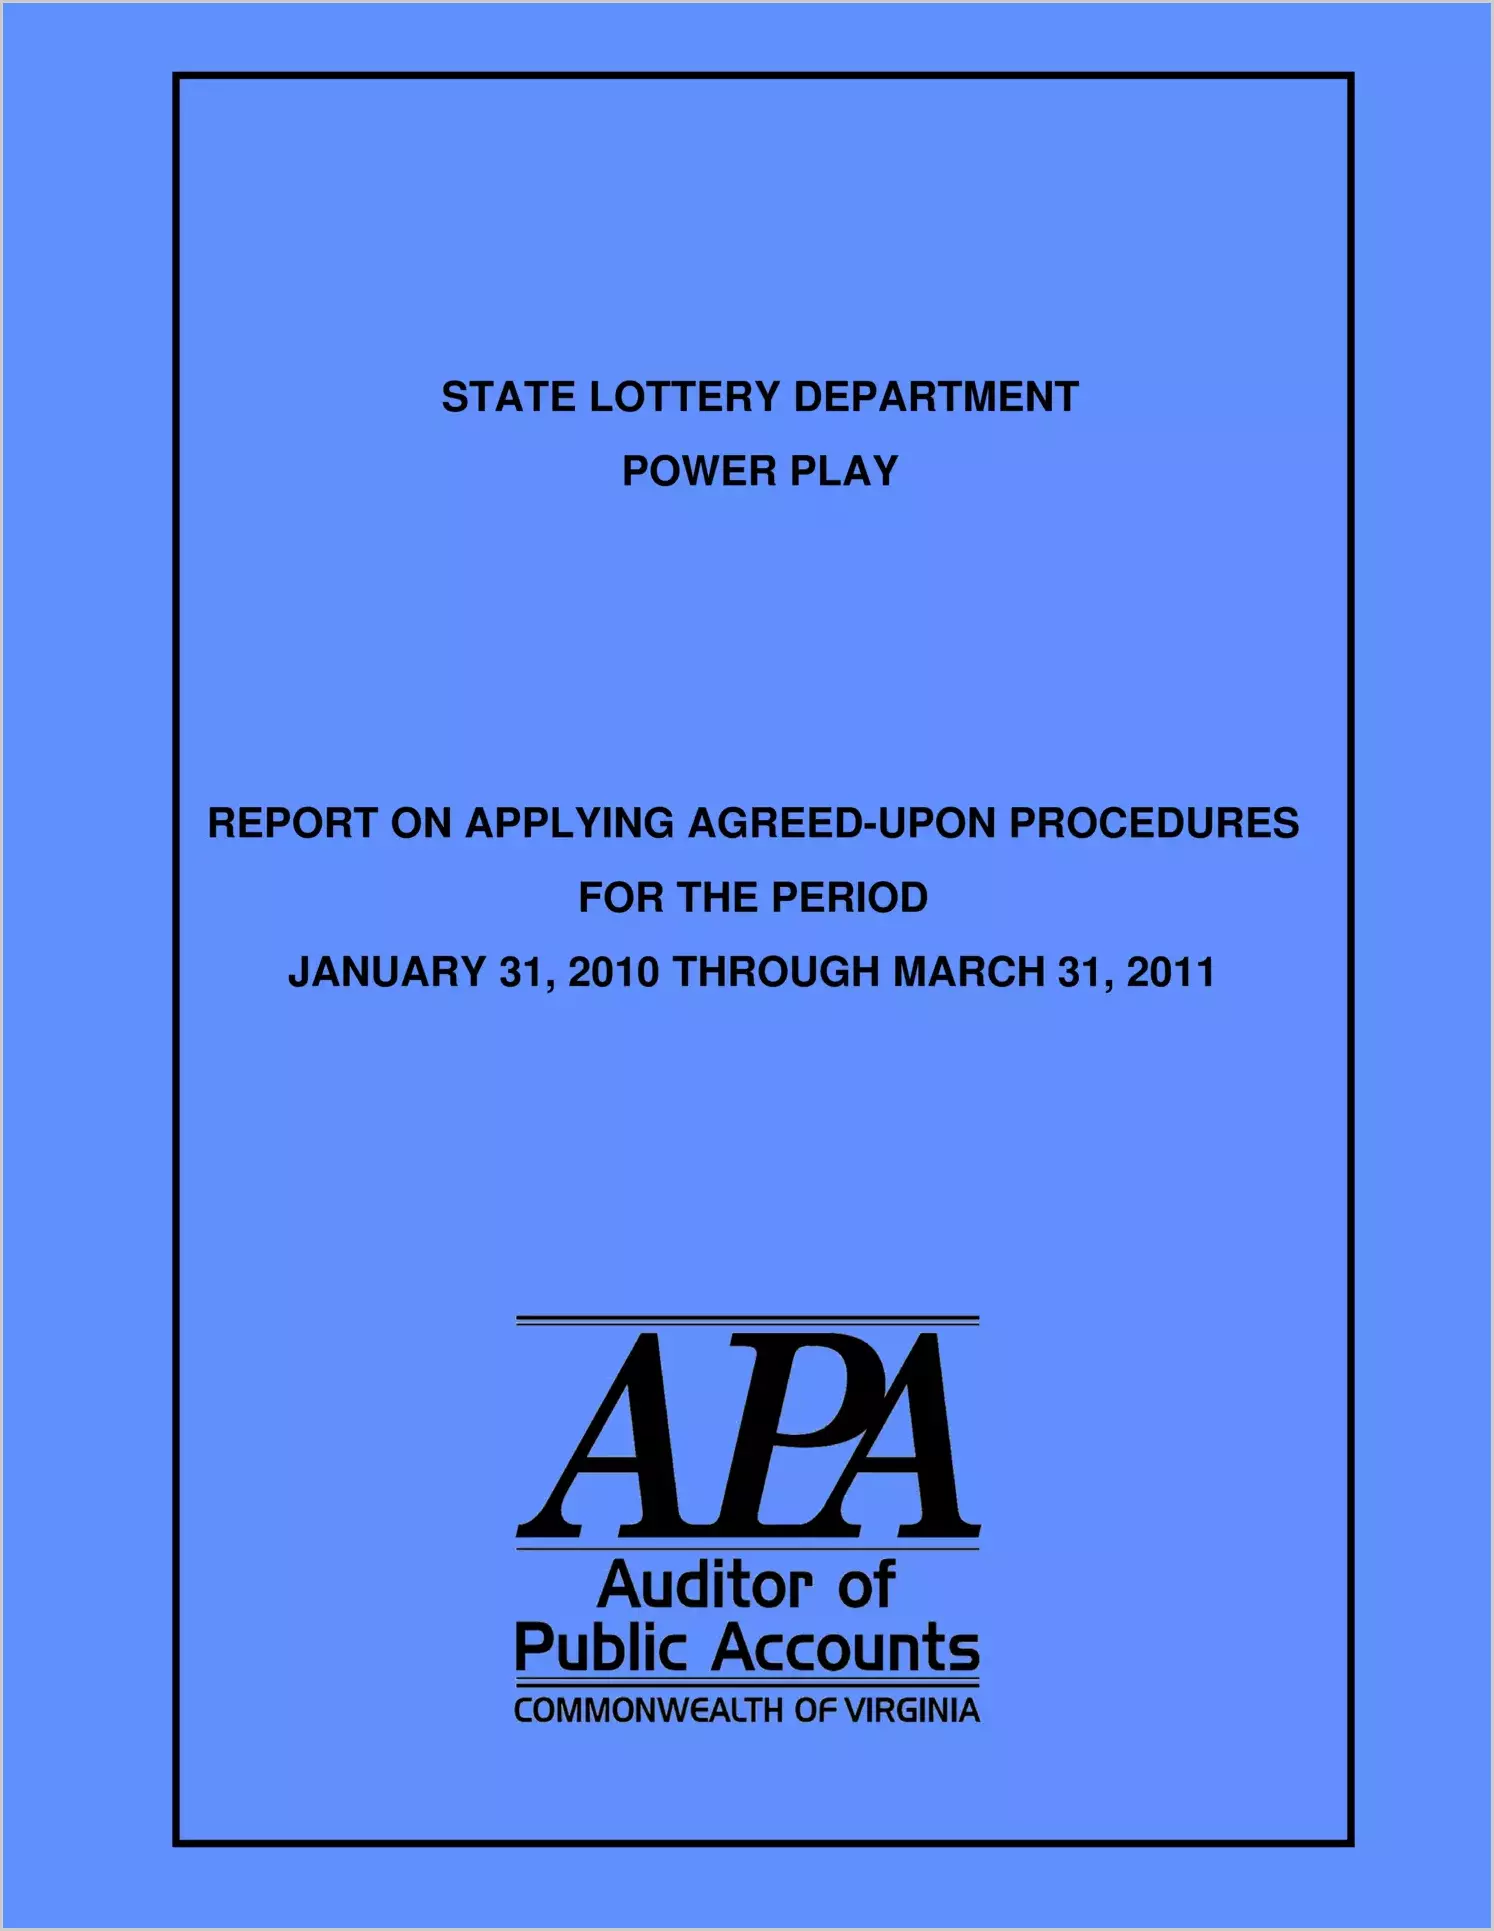 State Lottery Department: Power Play Report on Applying Agreed-Upon Procedures for the period January 31, 2010 through March 31, 2010